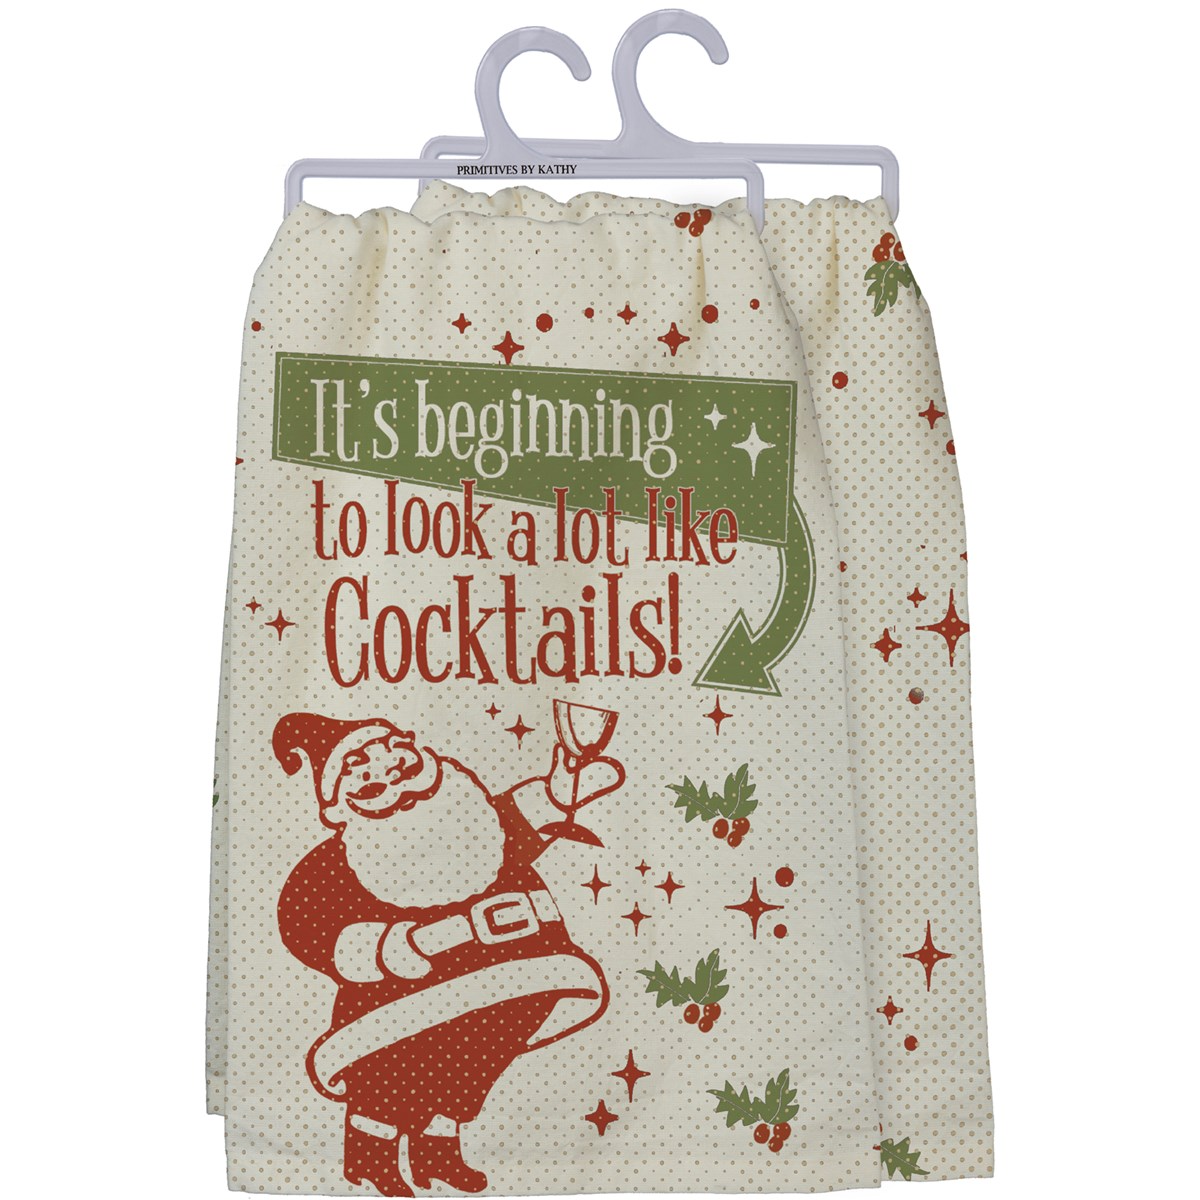 “Look a Lot Like Cocktails” Christmas Kitchen Towel